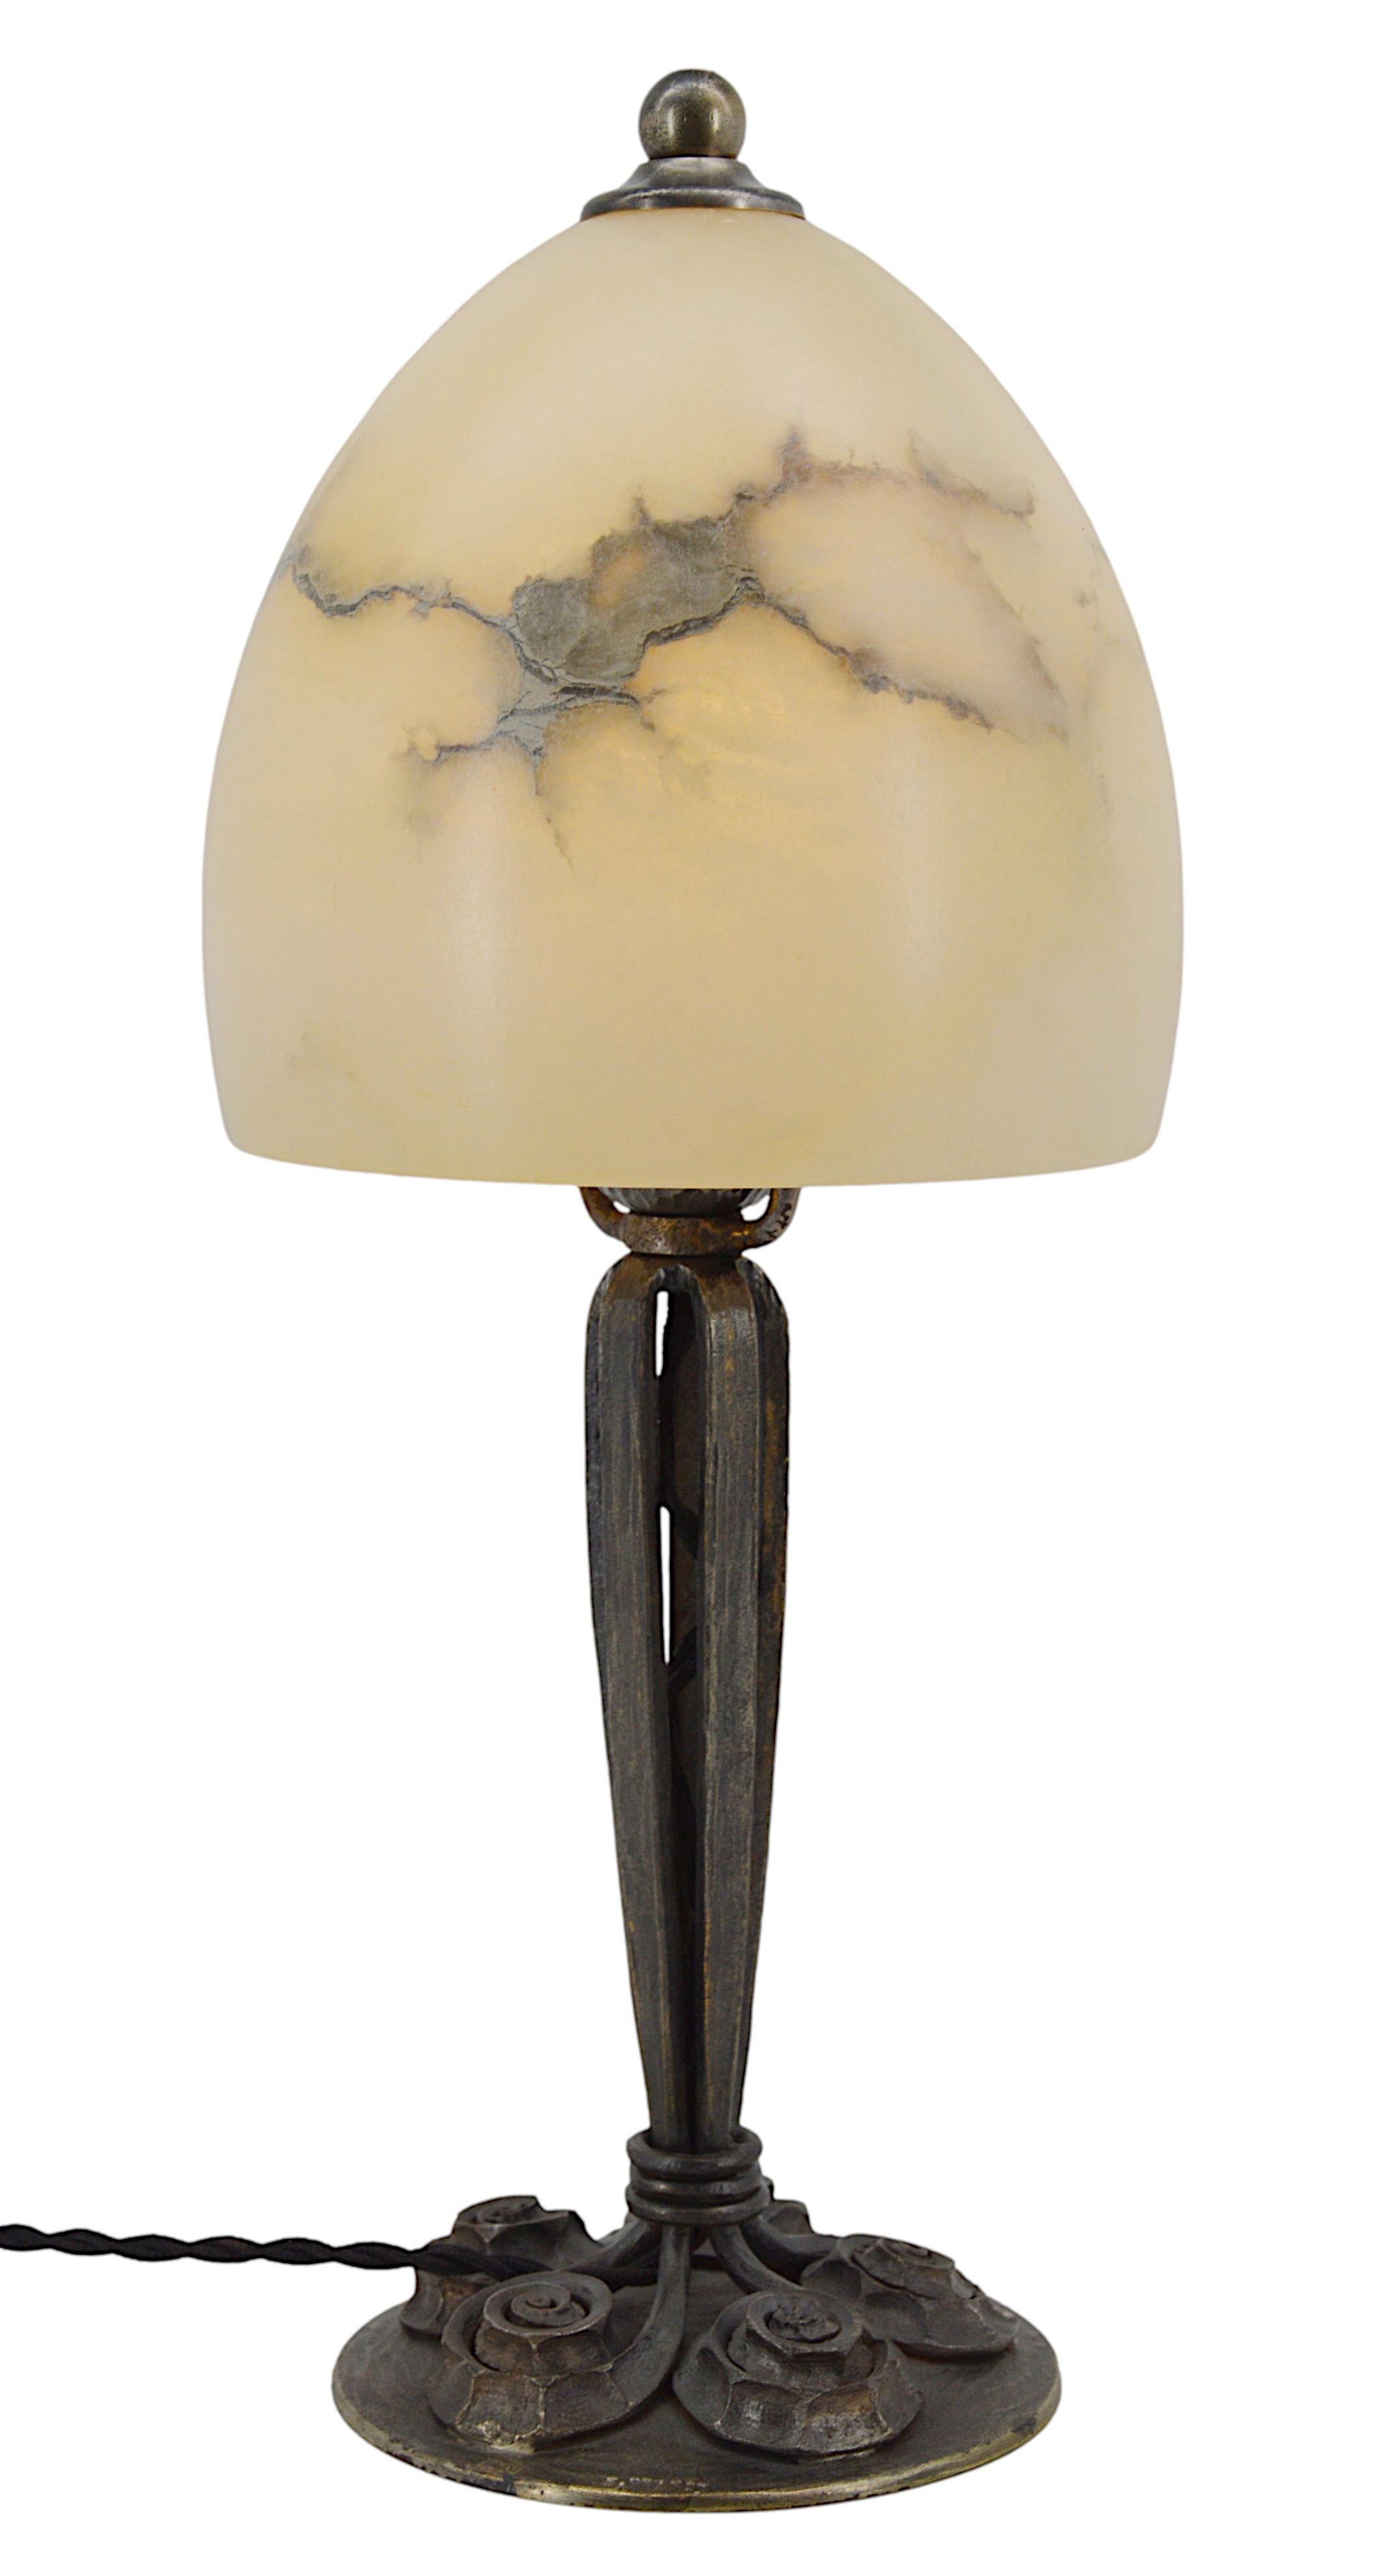 French Art Deco table lamp by Edgar BRANDT, France, 1920s. Wrought-iron base. Alabaster shade. Old alabaster cannot be compared to new ones. Old alabaster has veins. Sometimes they can be mistaken for cracks. But they are not cracks, they are veins.